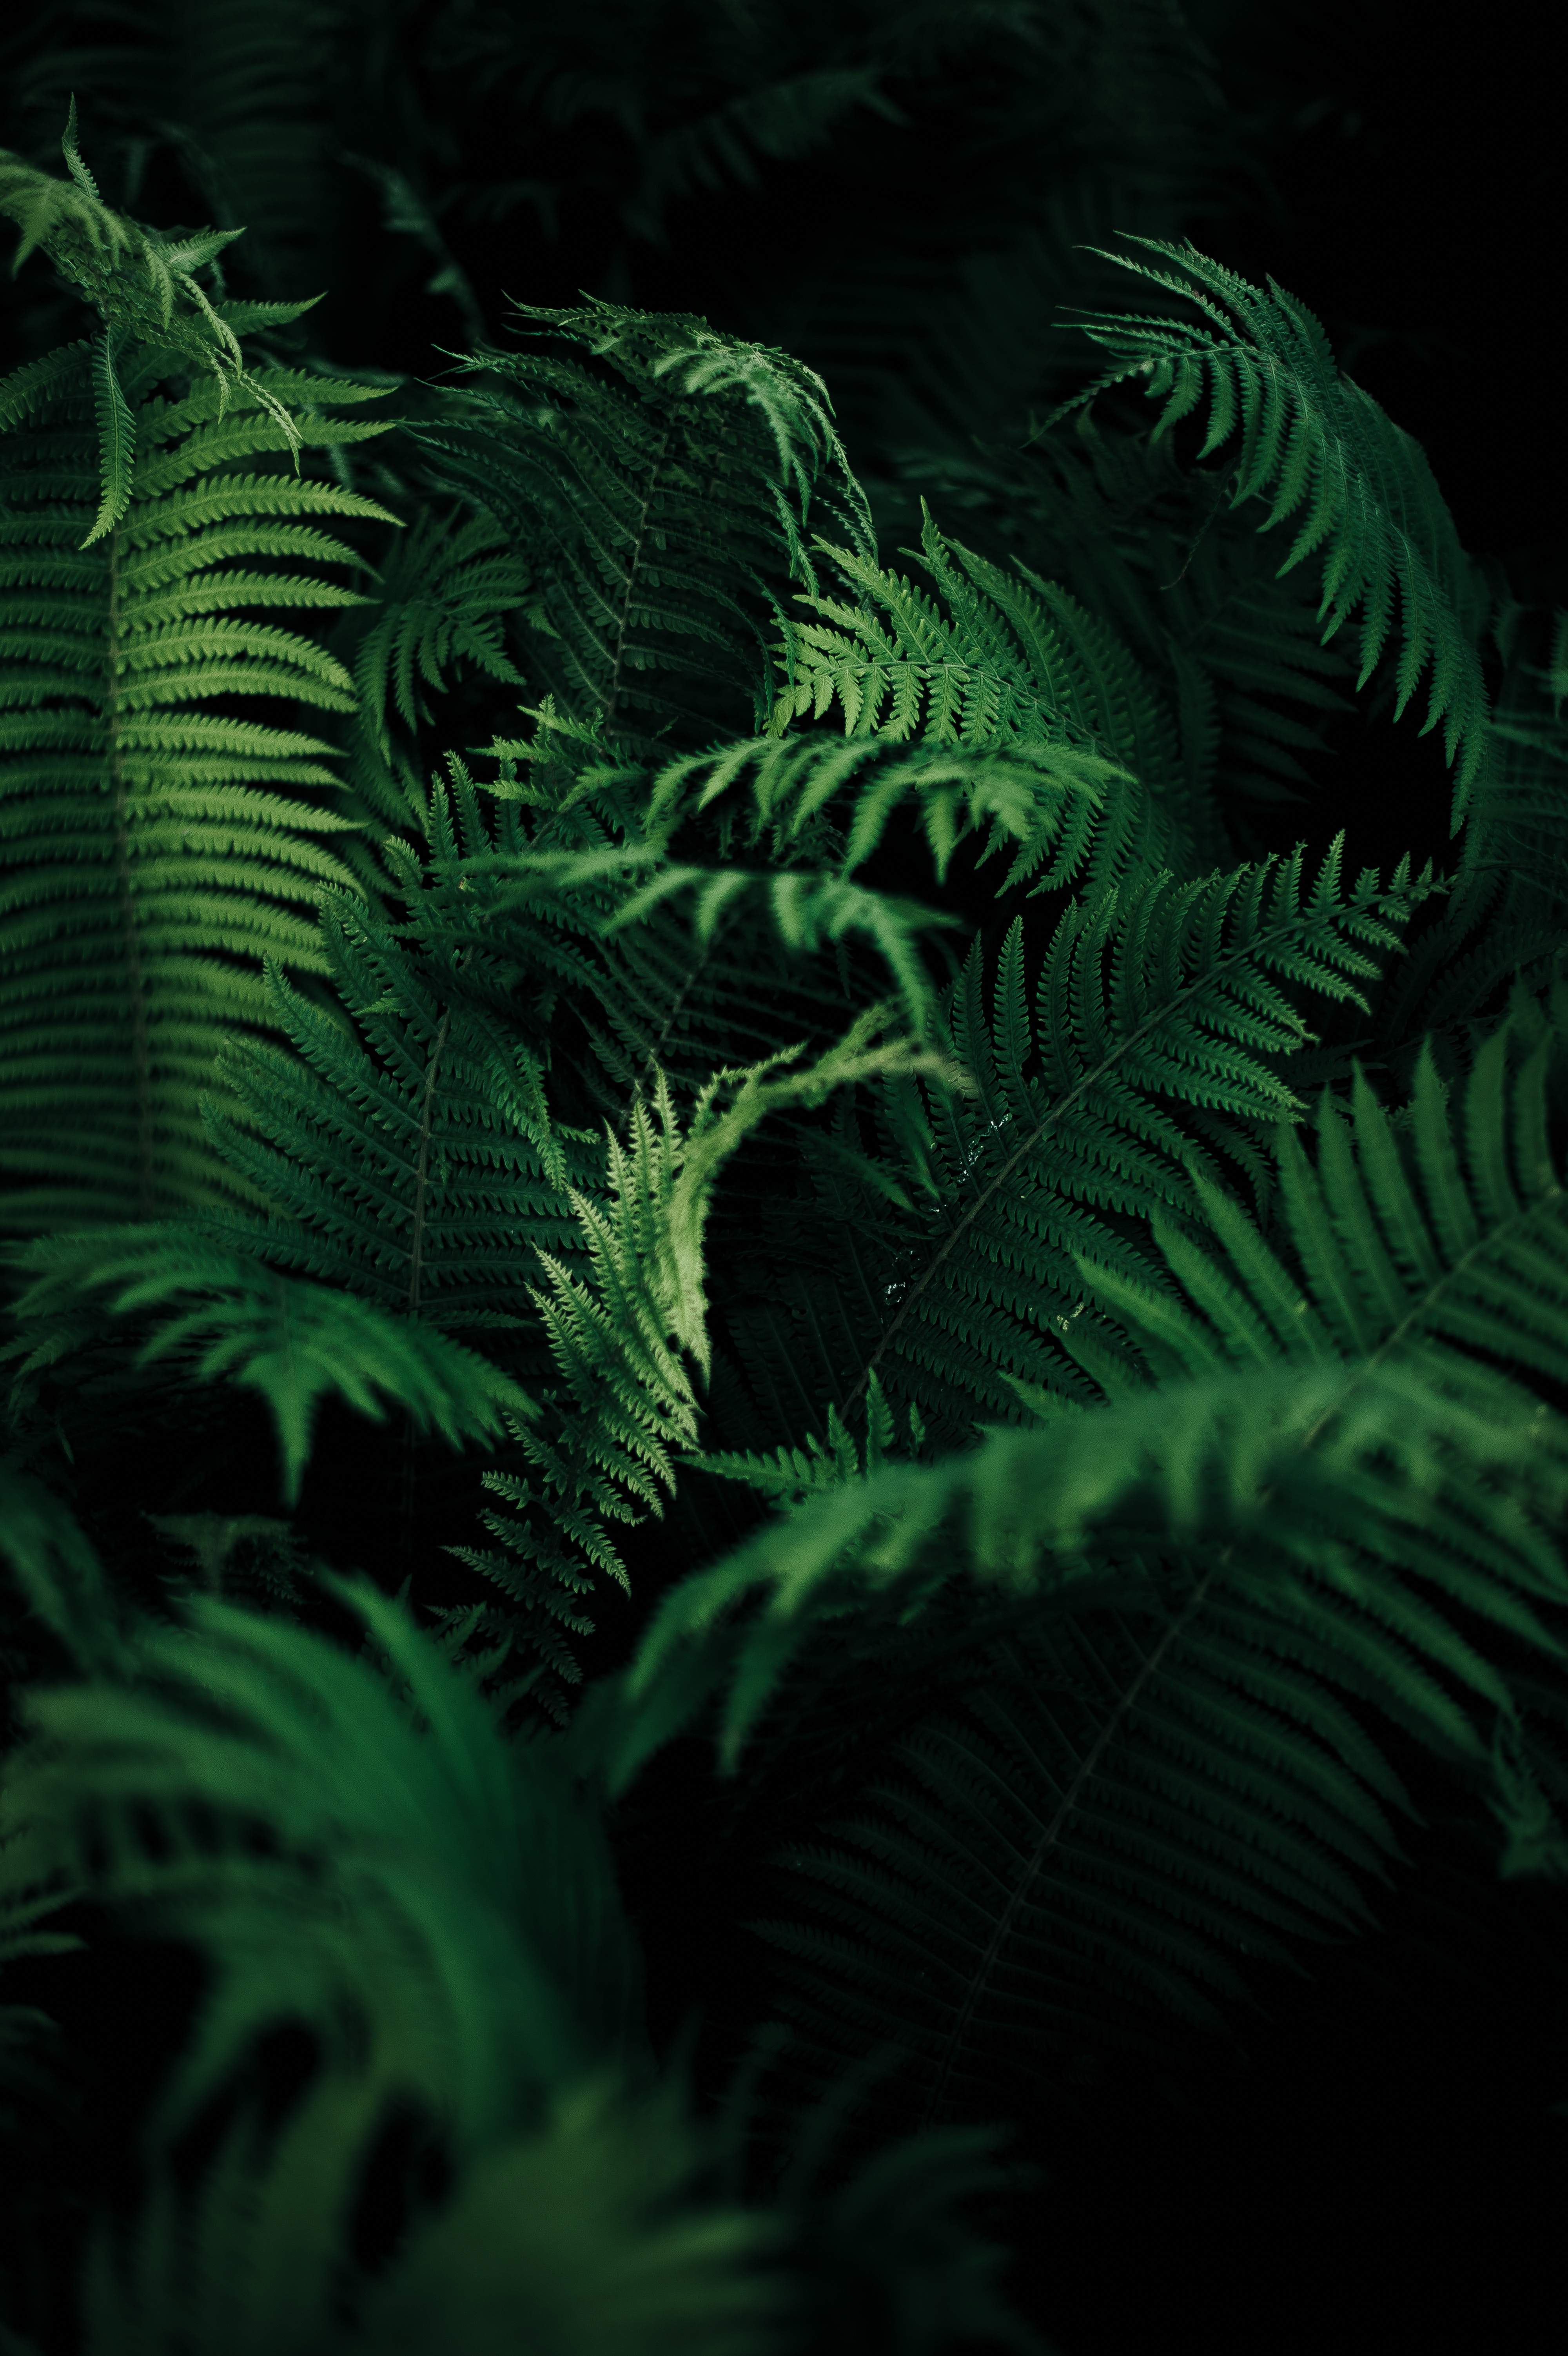 92460 download wallpaper plant, green, leaves, macro, fern, carved, vegetation screensavers and pictures for free